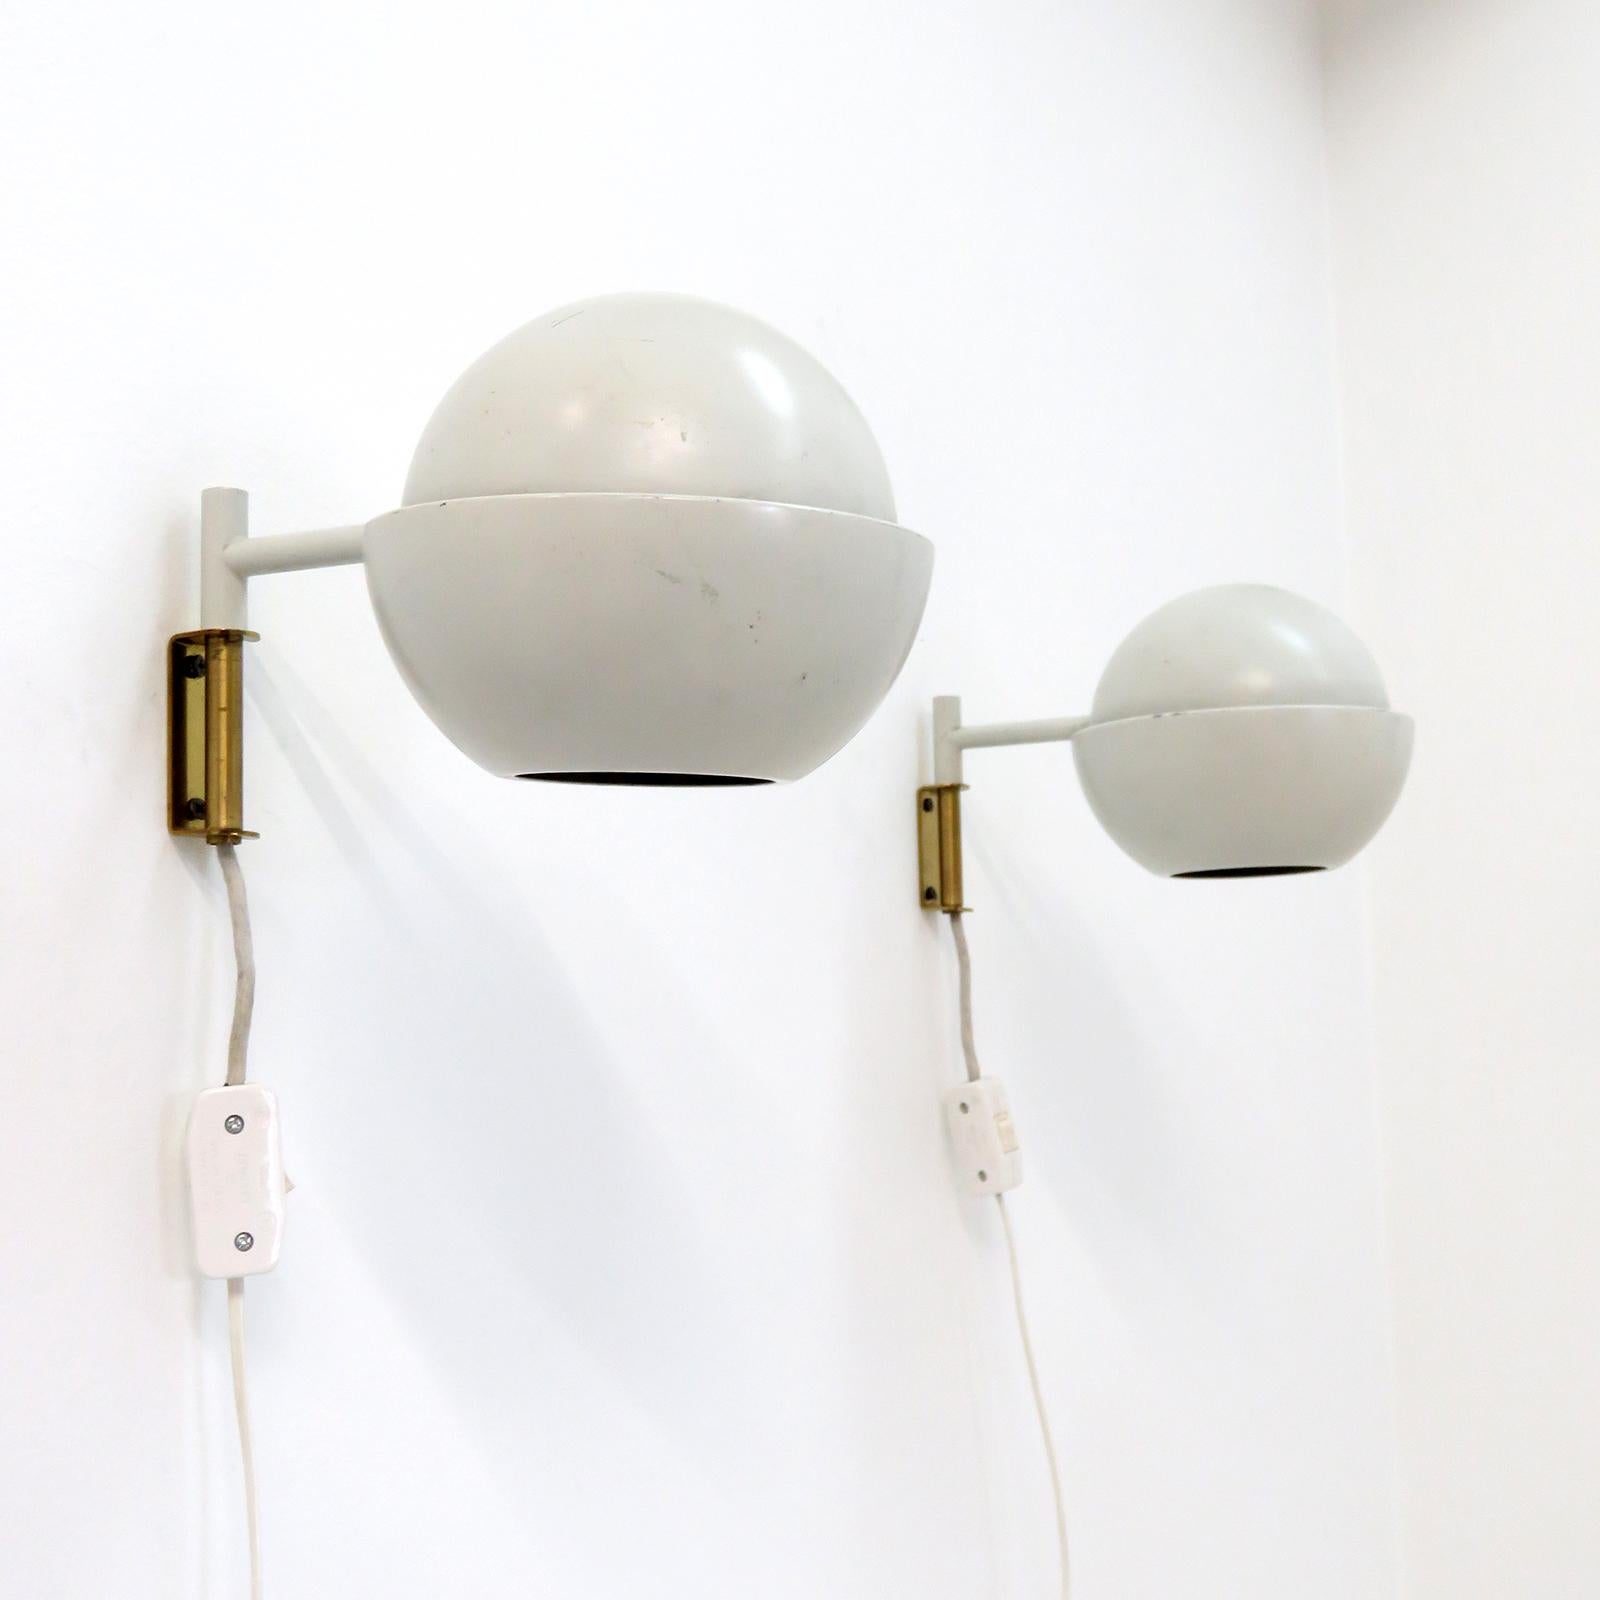 Wonderful articulate wall lights model '50-067' designed by Svea Winkler for Stockman Orno, Finland 1960, with light grey enameld sherical shade on a minimalist arm, plug in version with individual on/off in-line switch, wired for US standards, one